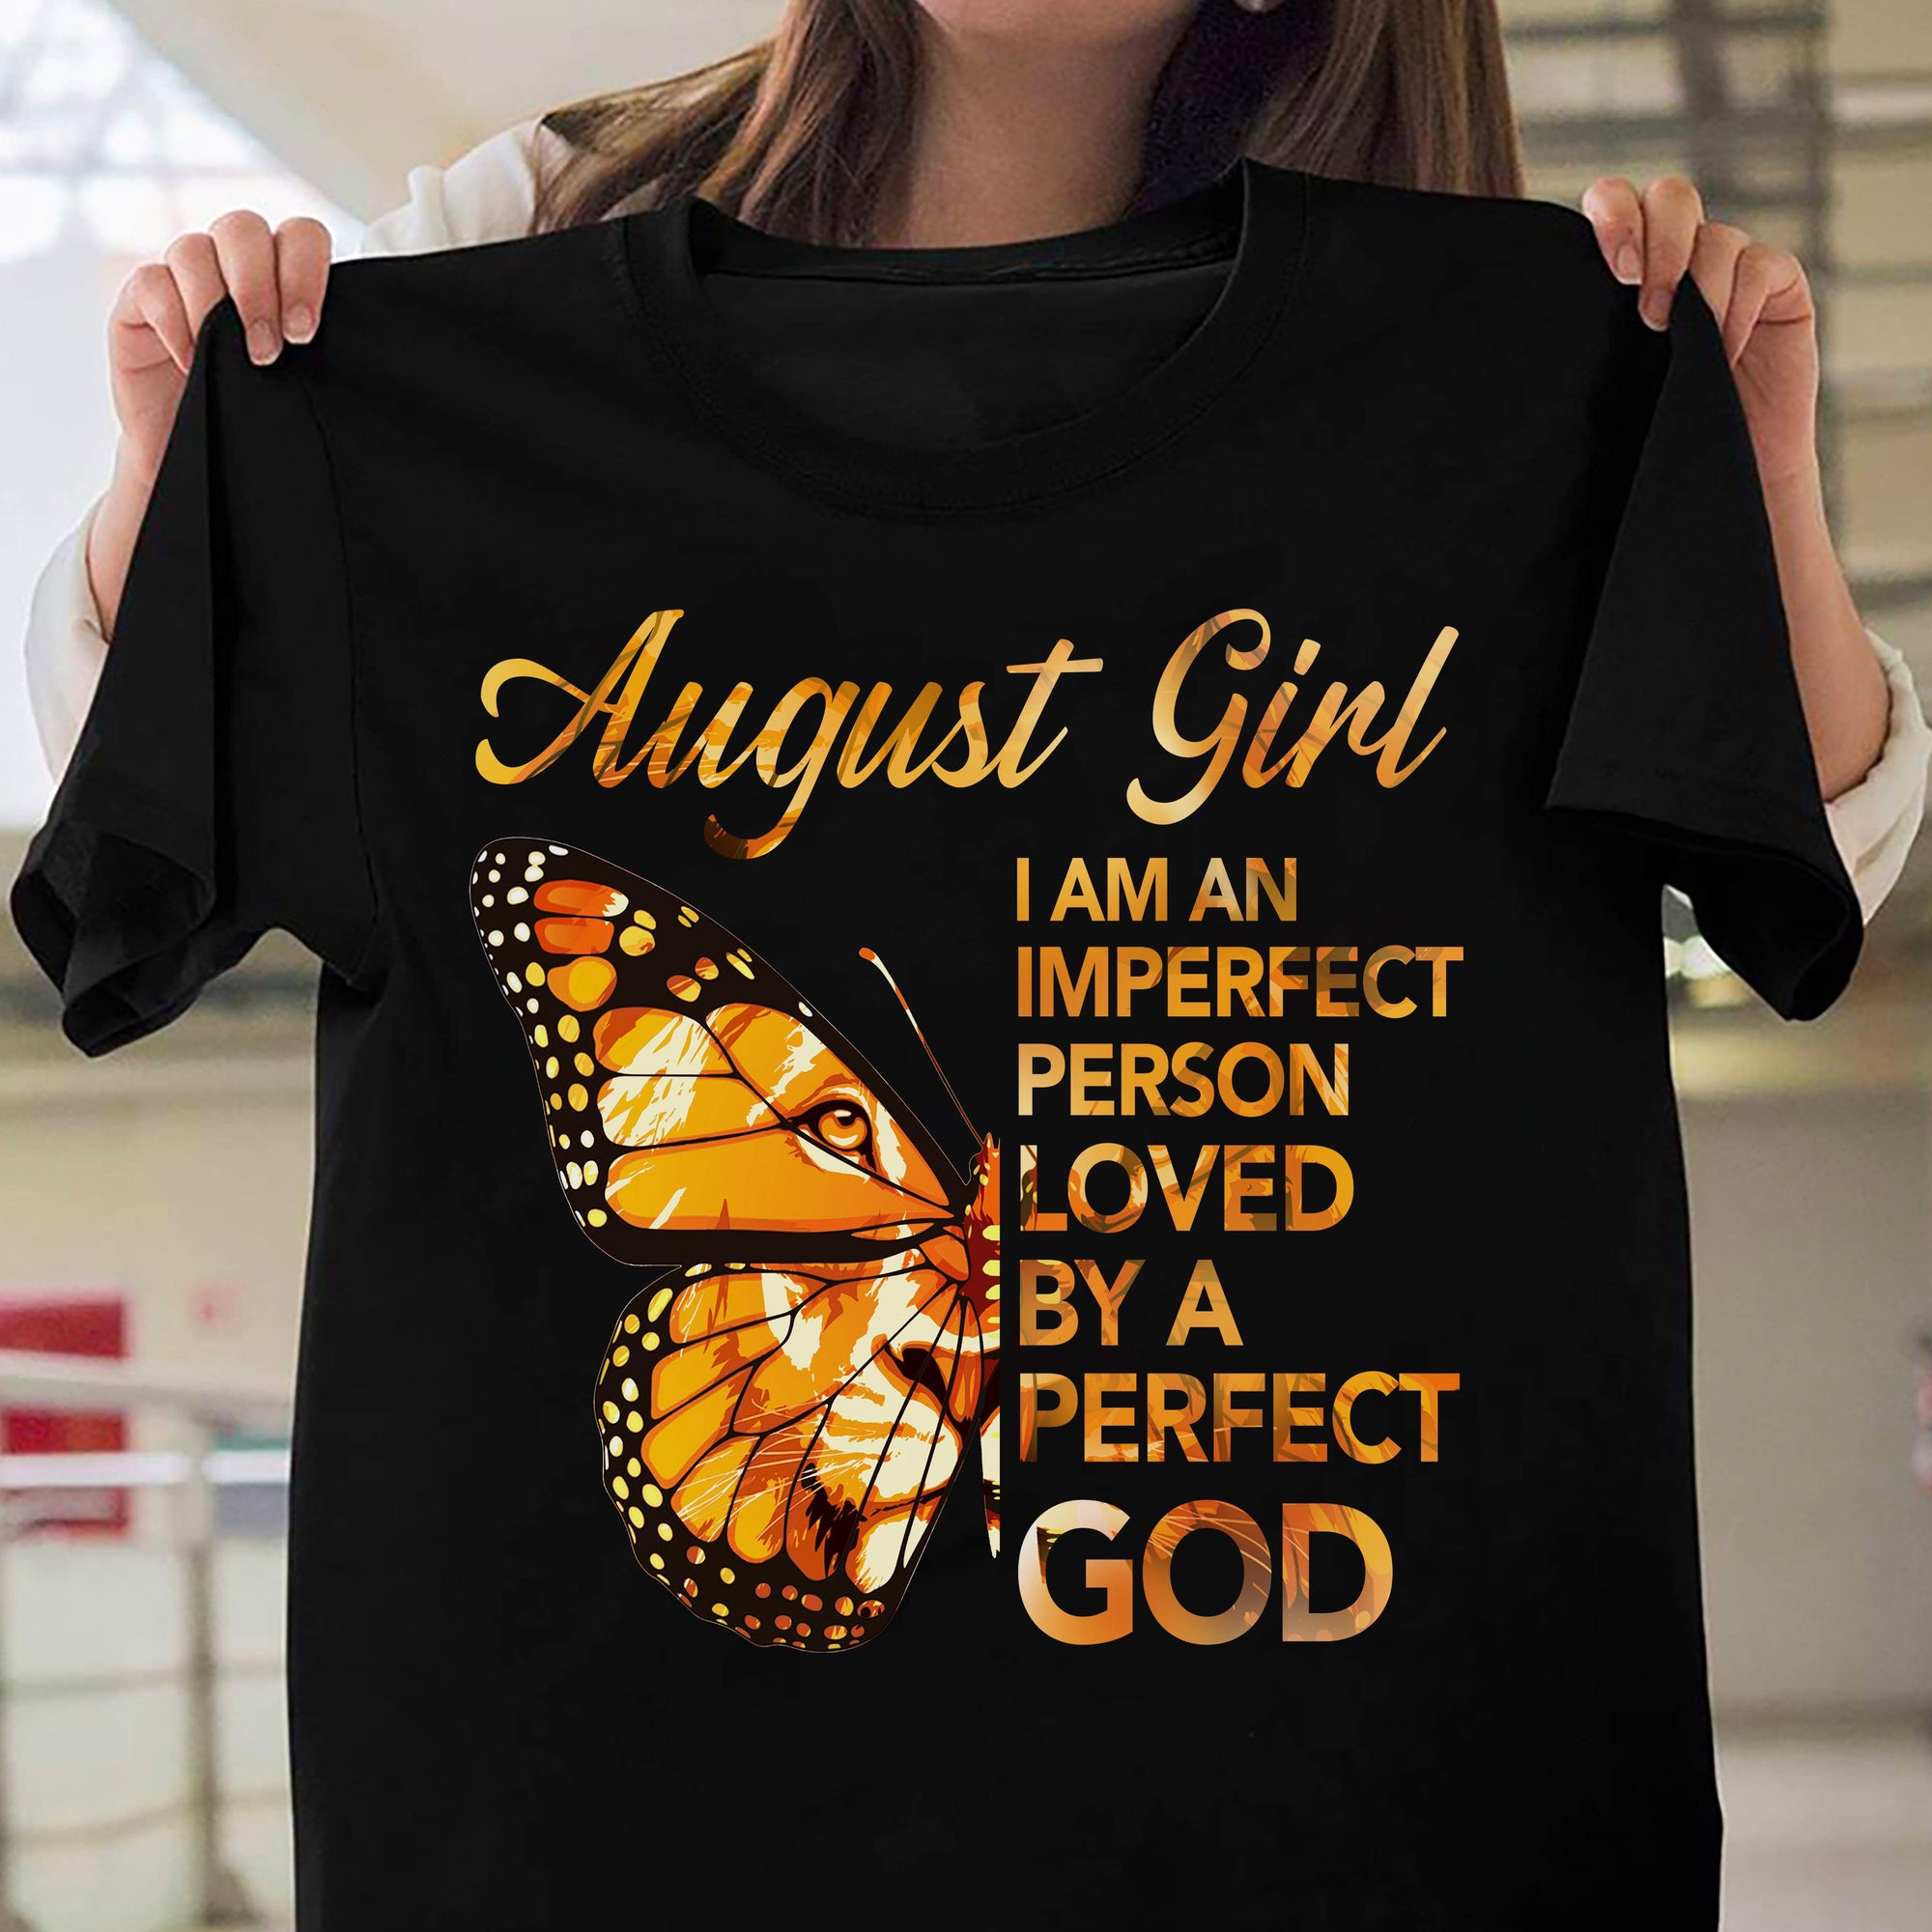 August girl, I'm an imperfect person loved by a perfect God Black Apparel